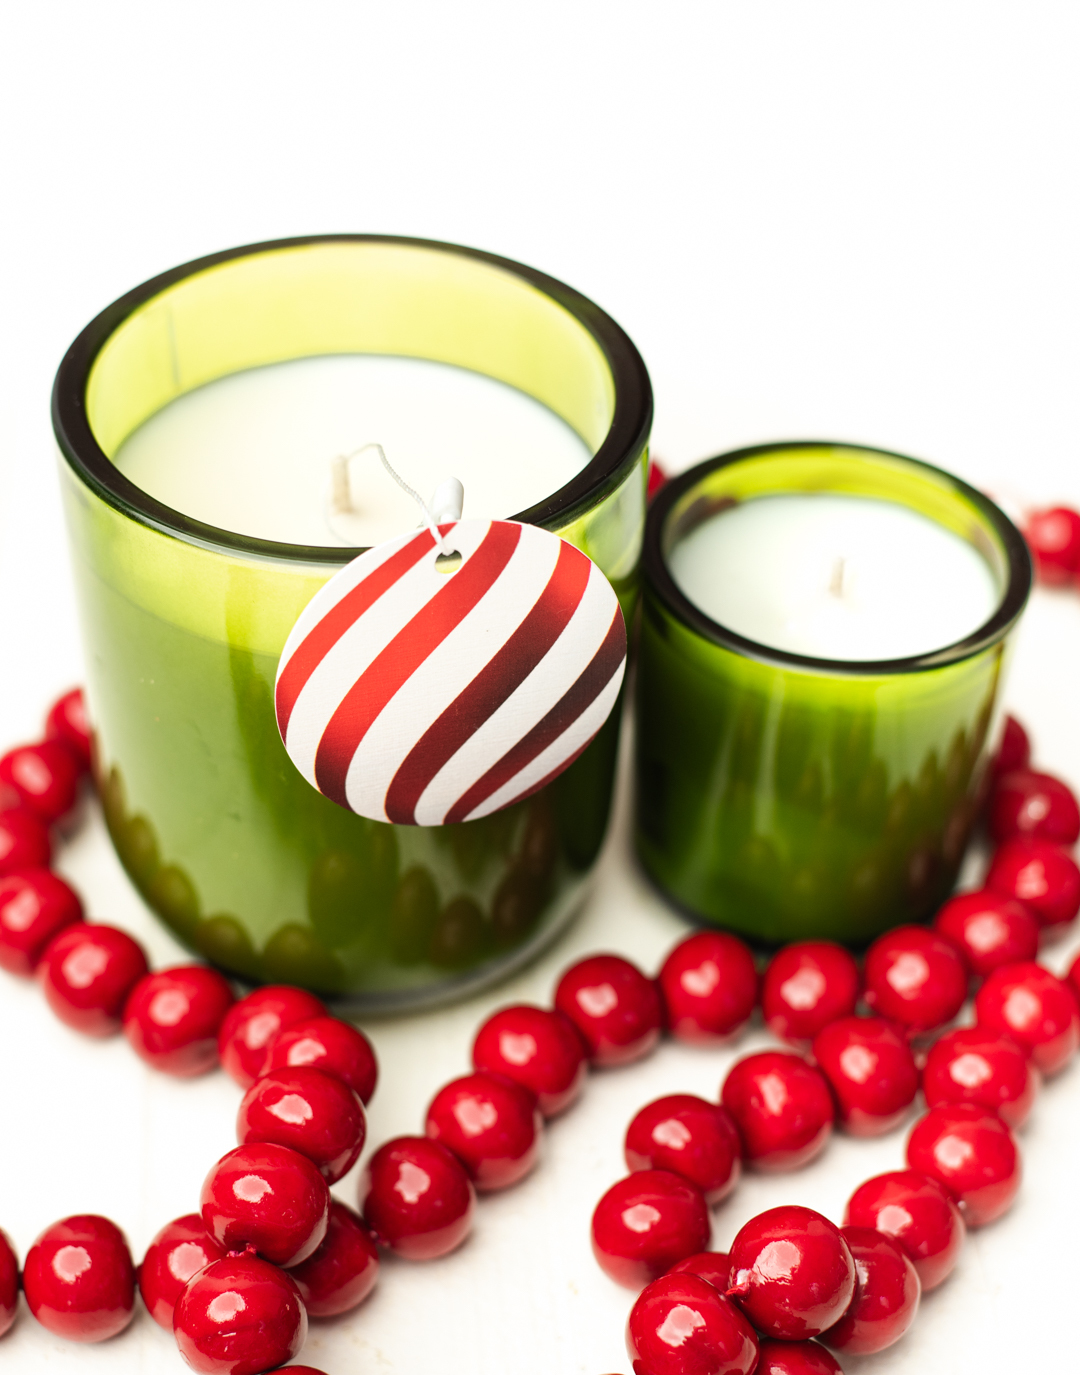 Two candles in green containers with red beads beside them. A tag that looks like a red ornament hangs from one of the candles.